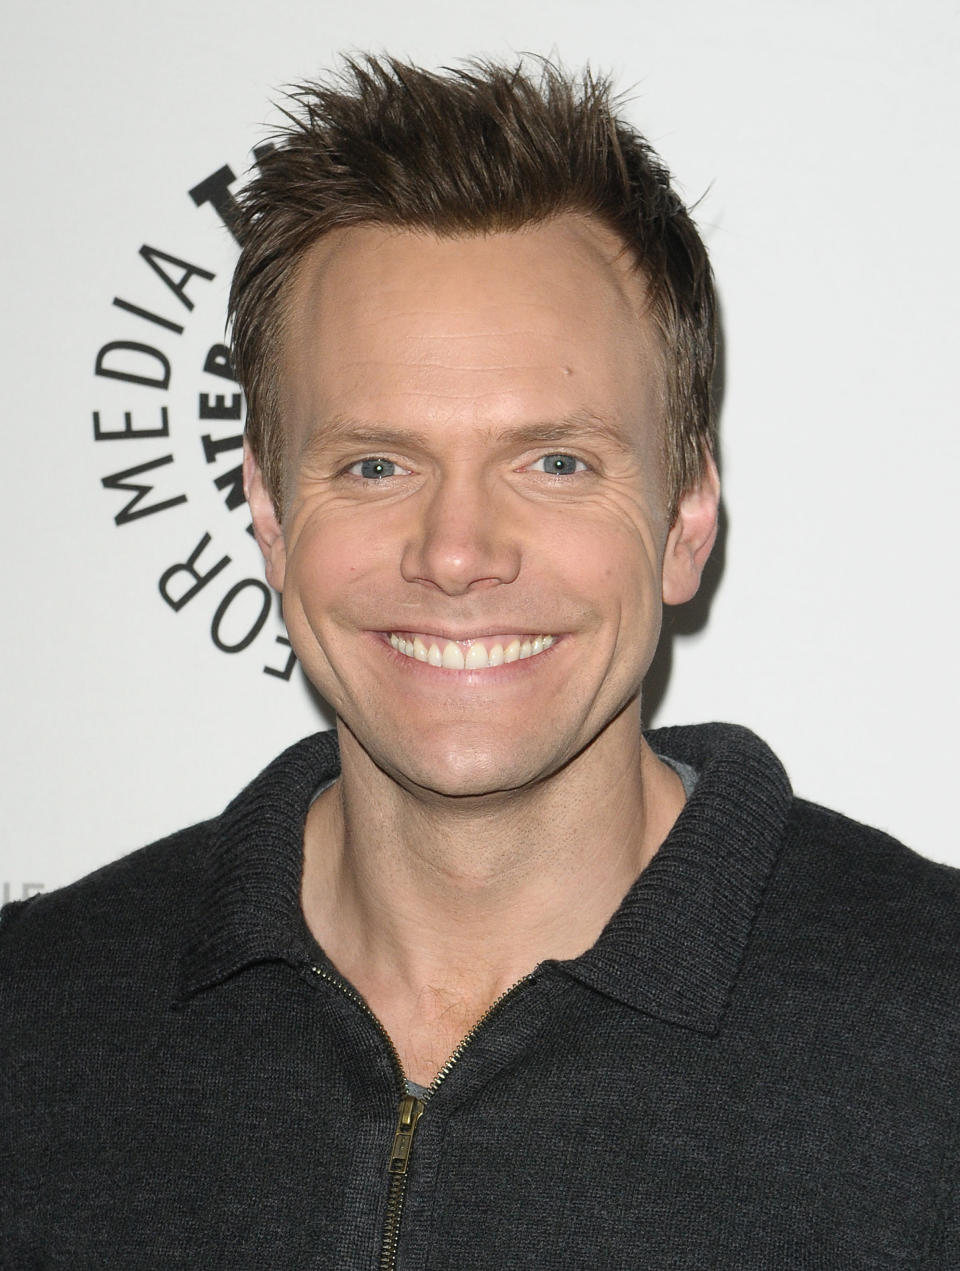 A closeup of Joel McHale smiling on the red carpet of a media event. He's wearing a zippered sweater